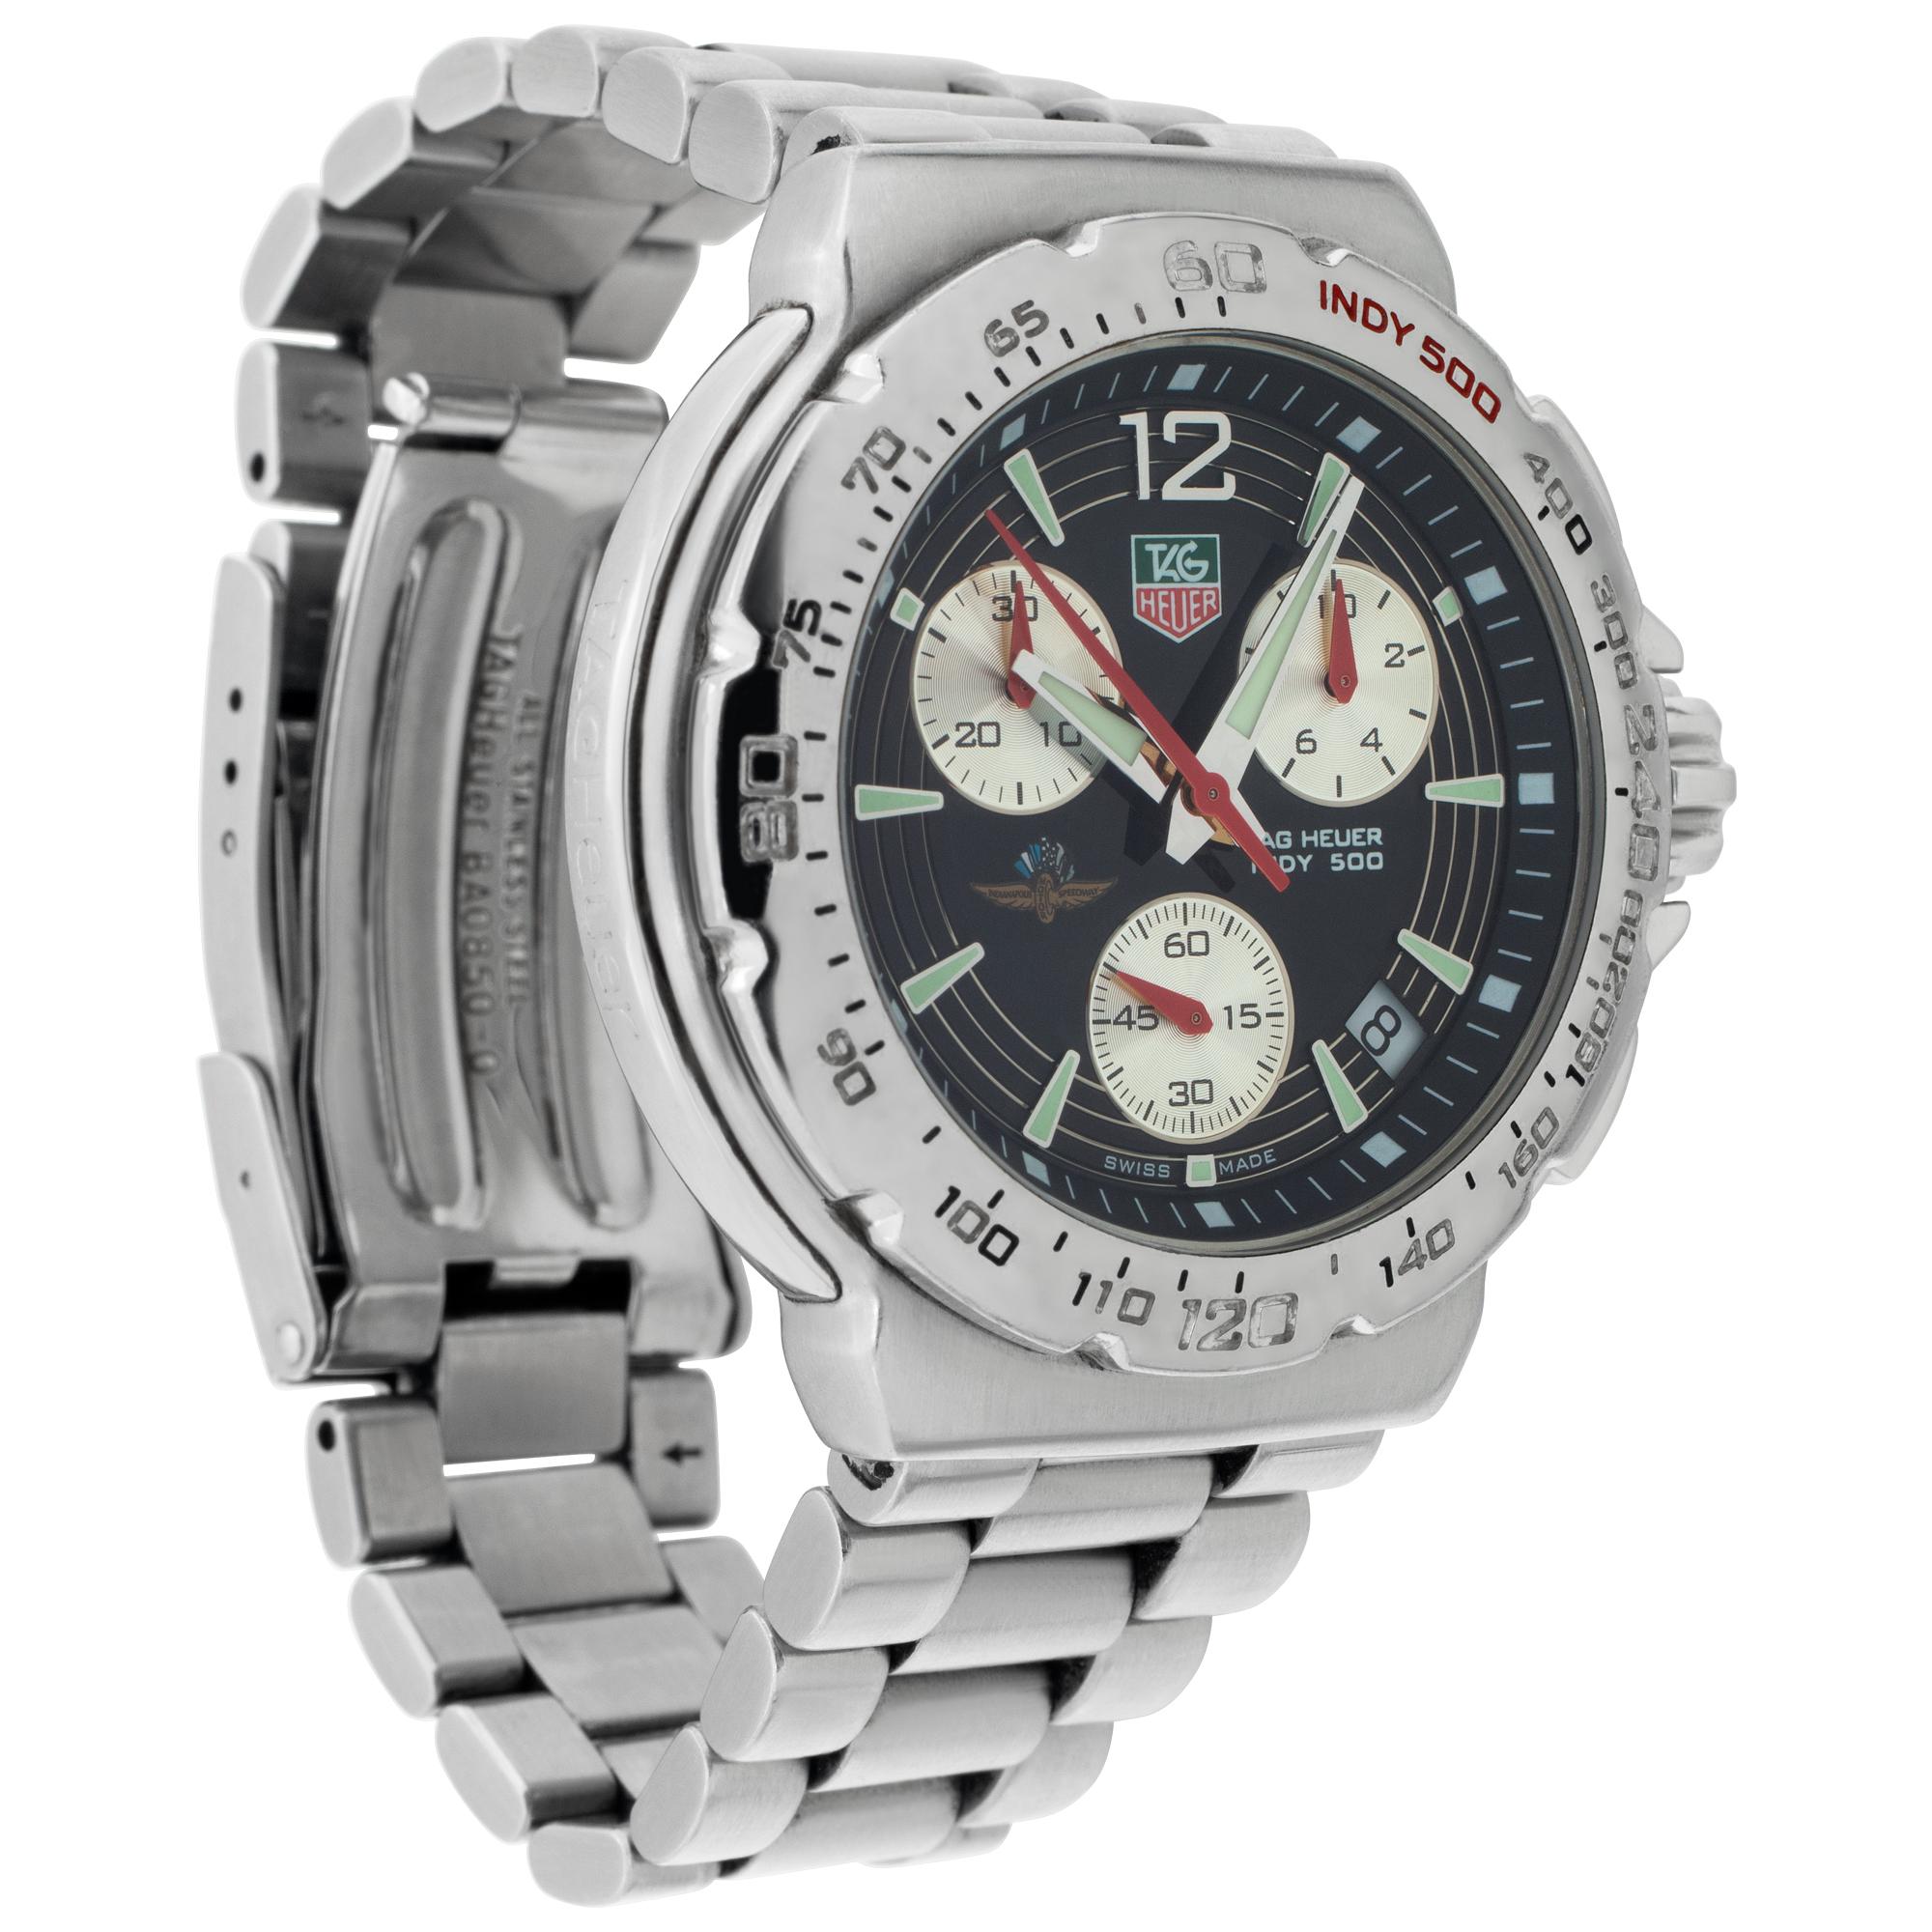 tag heuer indy 500 chronograph